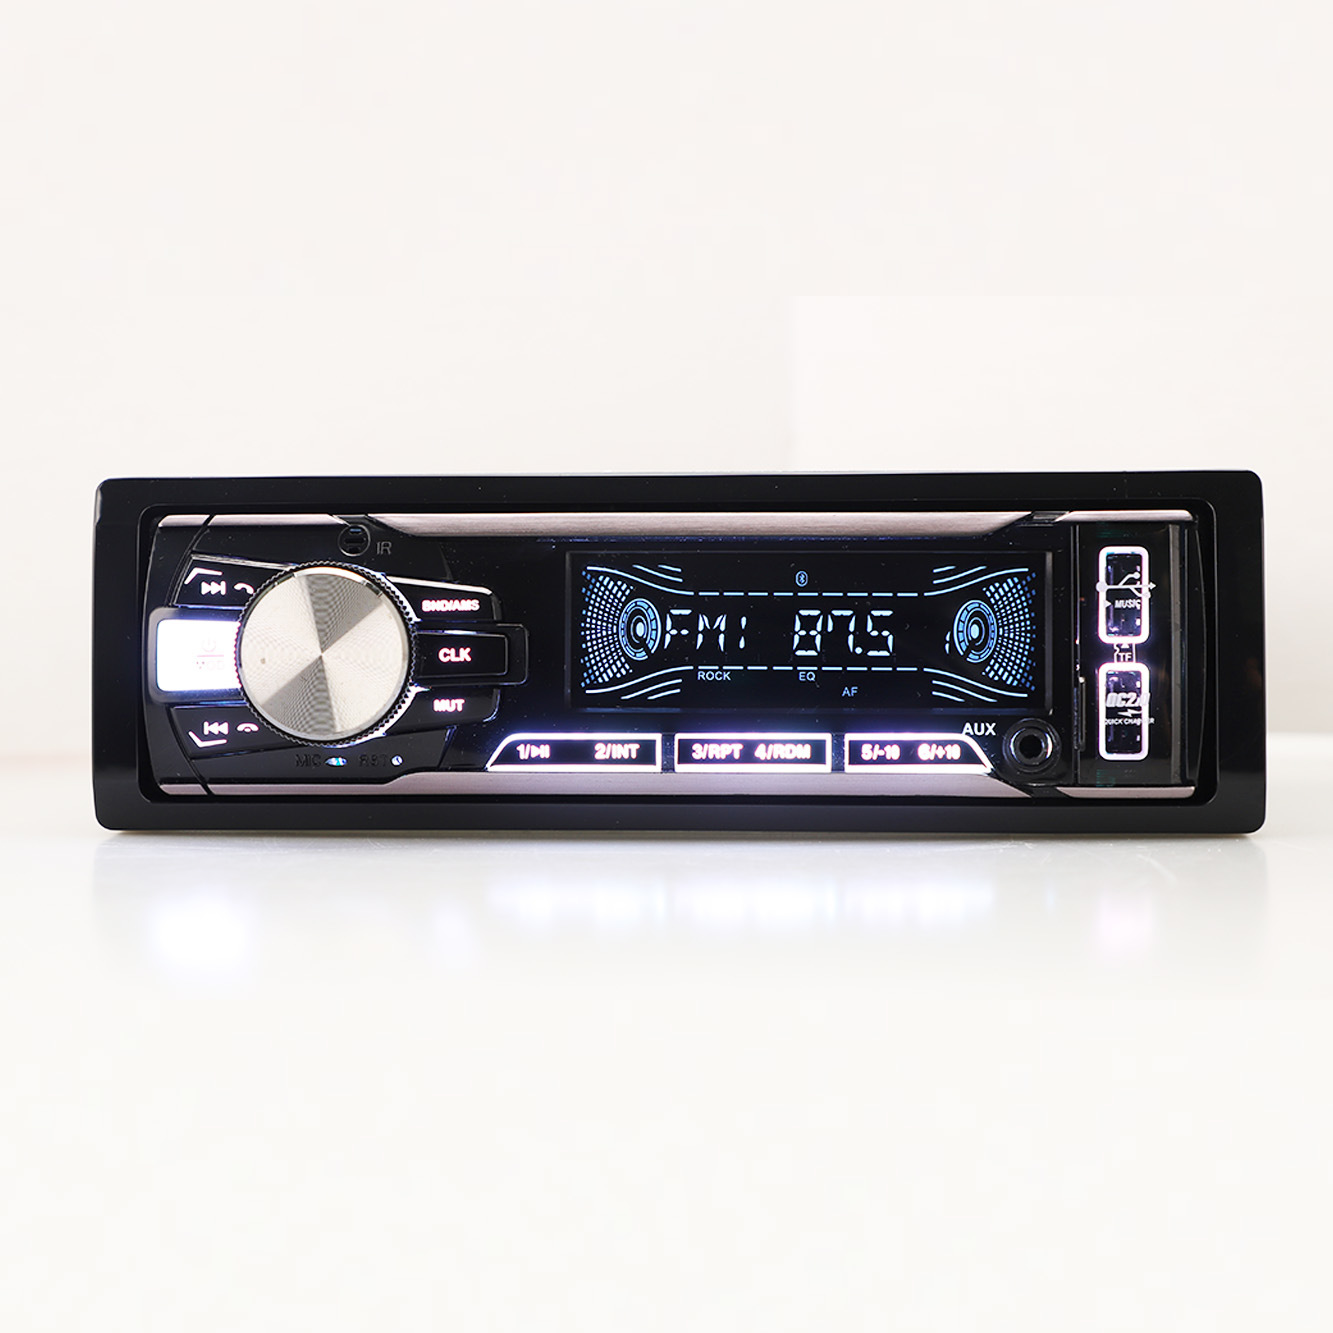 Car Video Player Car Video Player MP3 for Car Auto Car MP3 Player Fixed Panel Car Audio